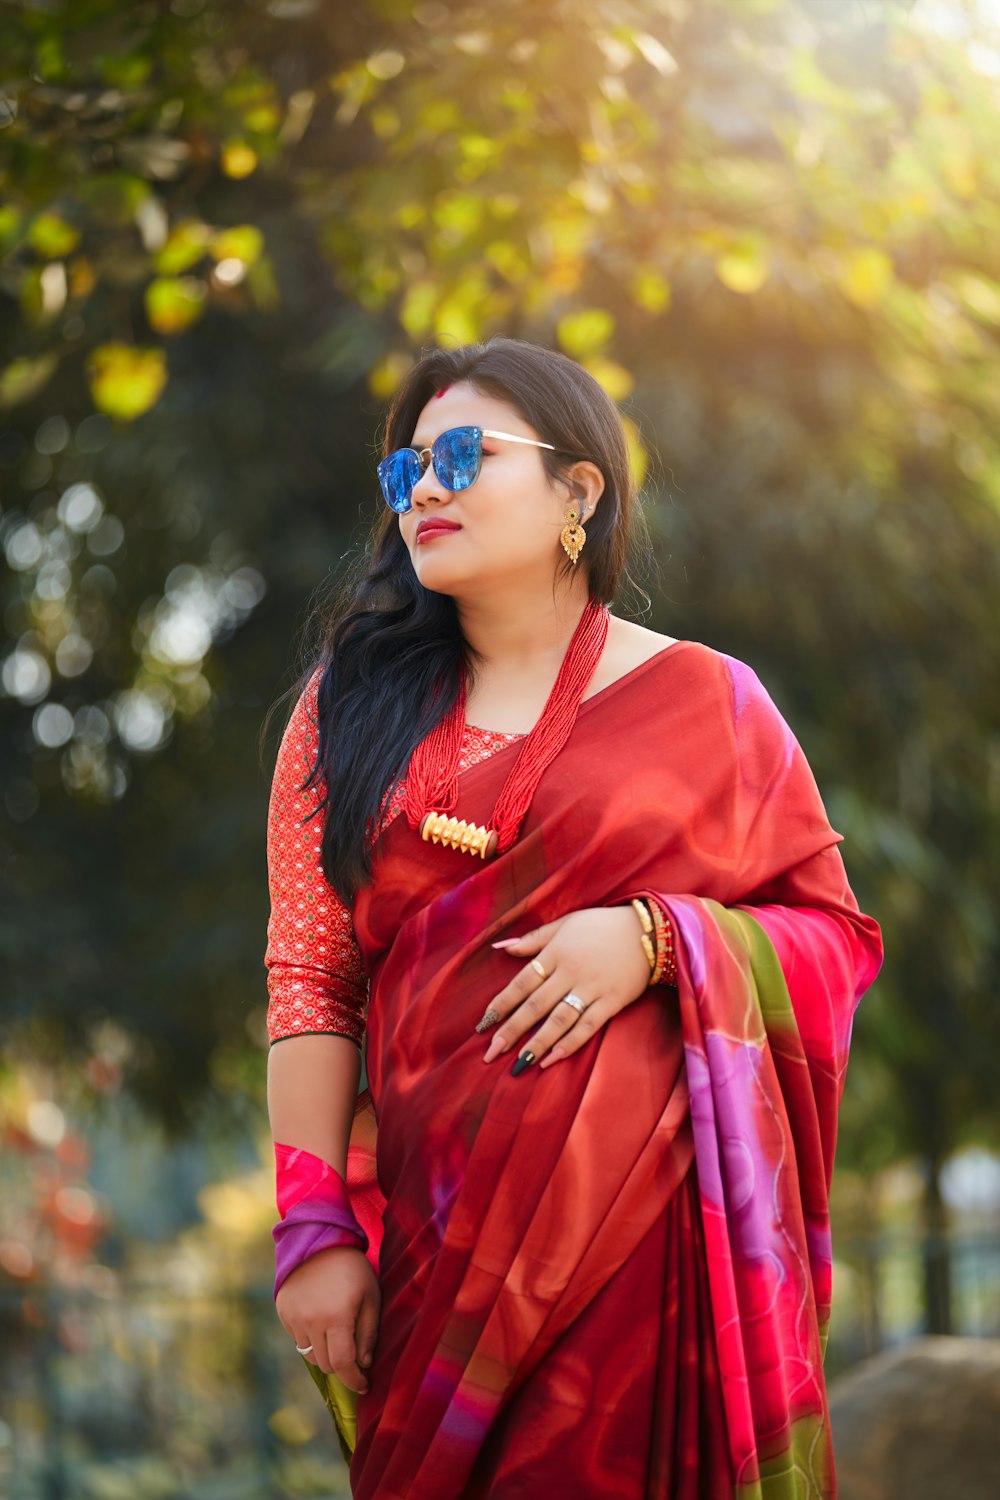 a woman wearing a red sari and sunglasses